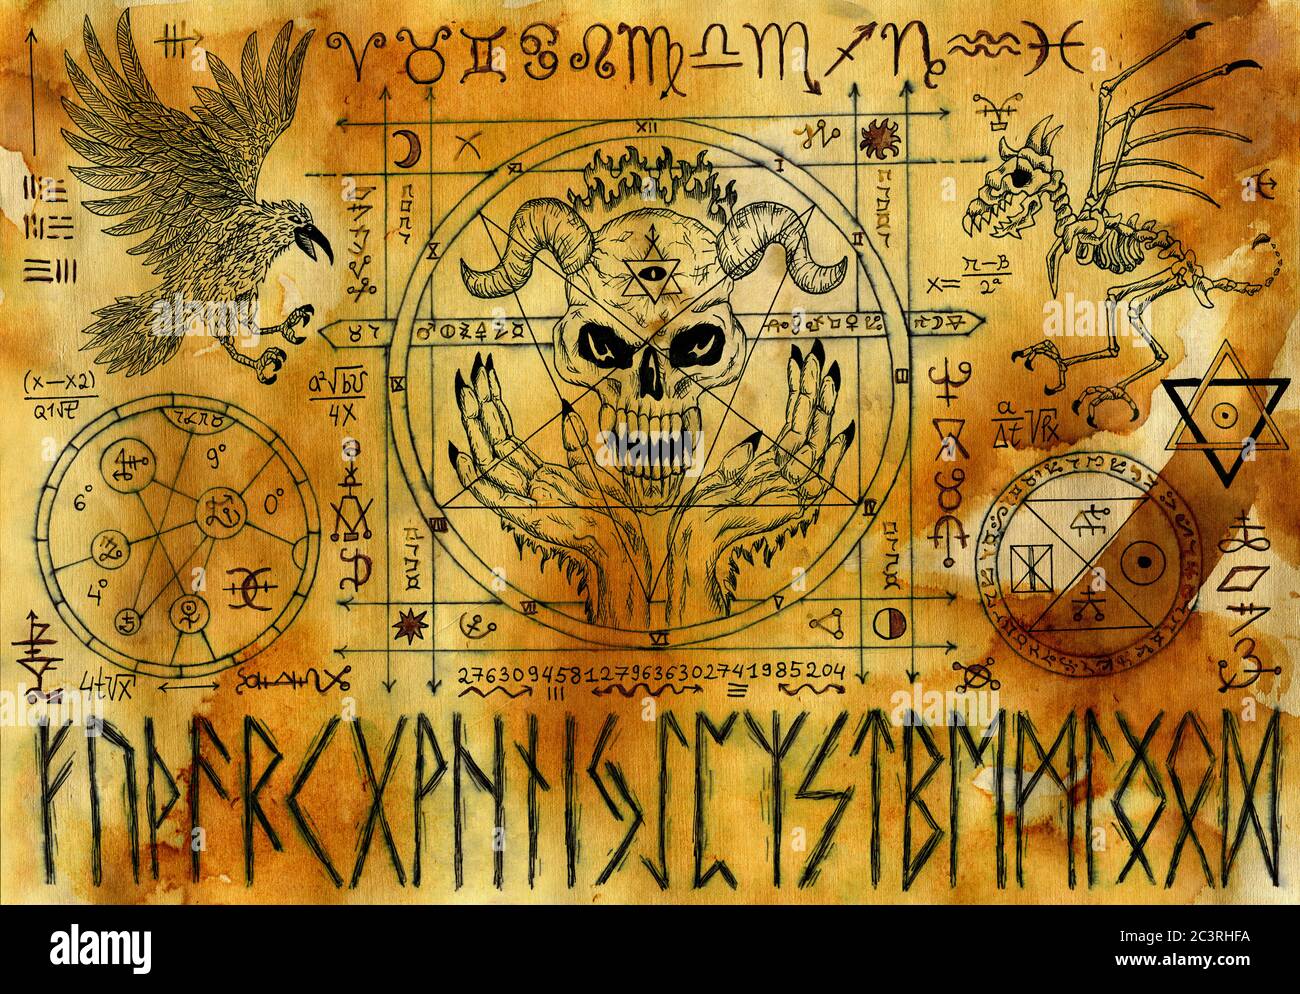 Ouija magic spiritual board design with demon, crow and runes on old paper background. Esoteric, occult and sacred geometry illustration with mystic a Stock Photo